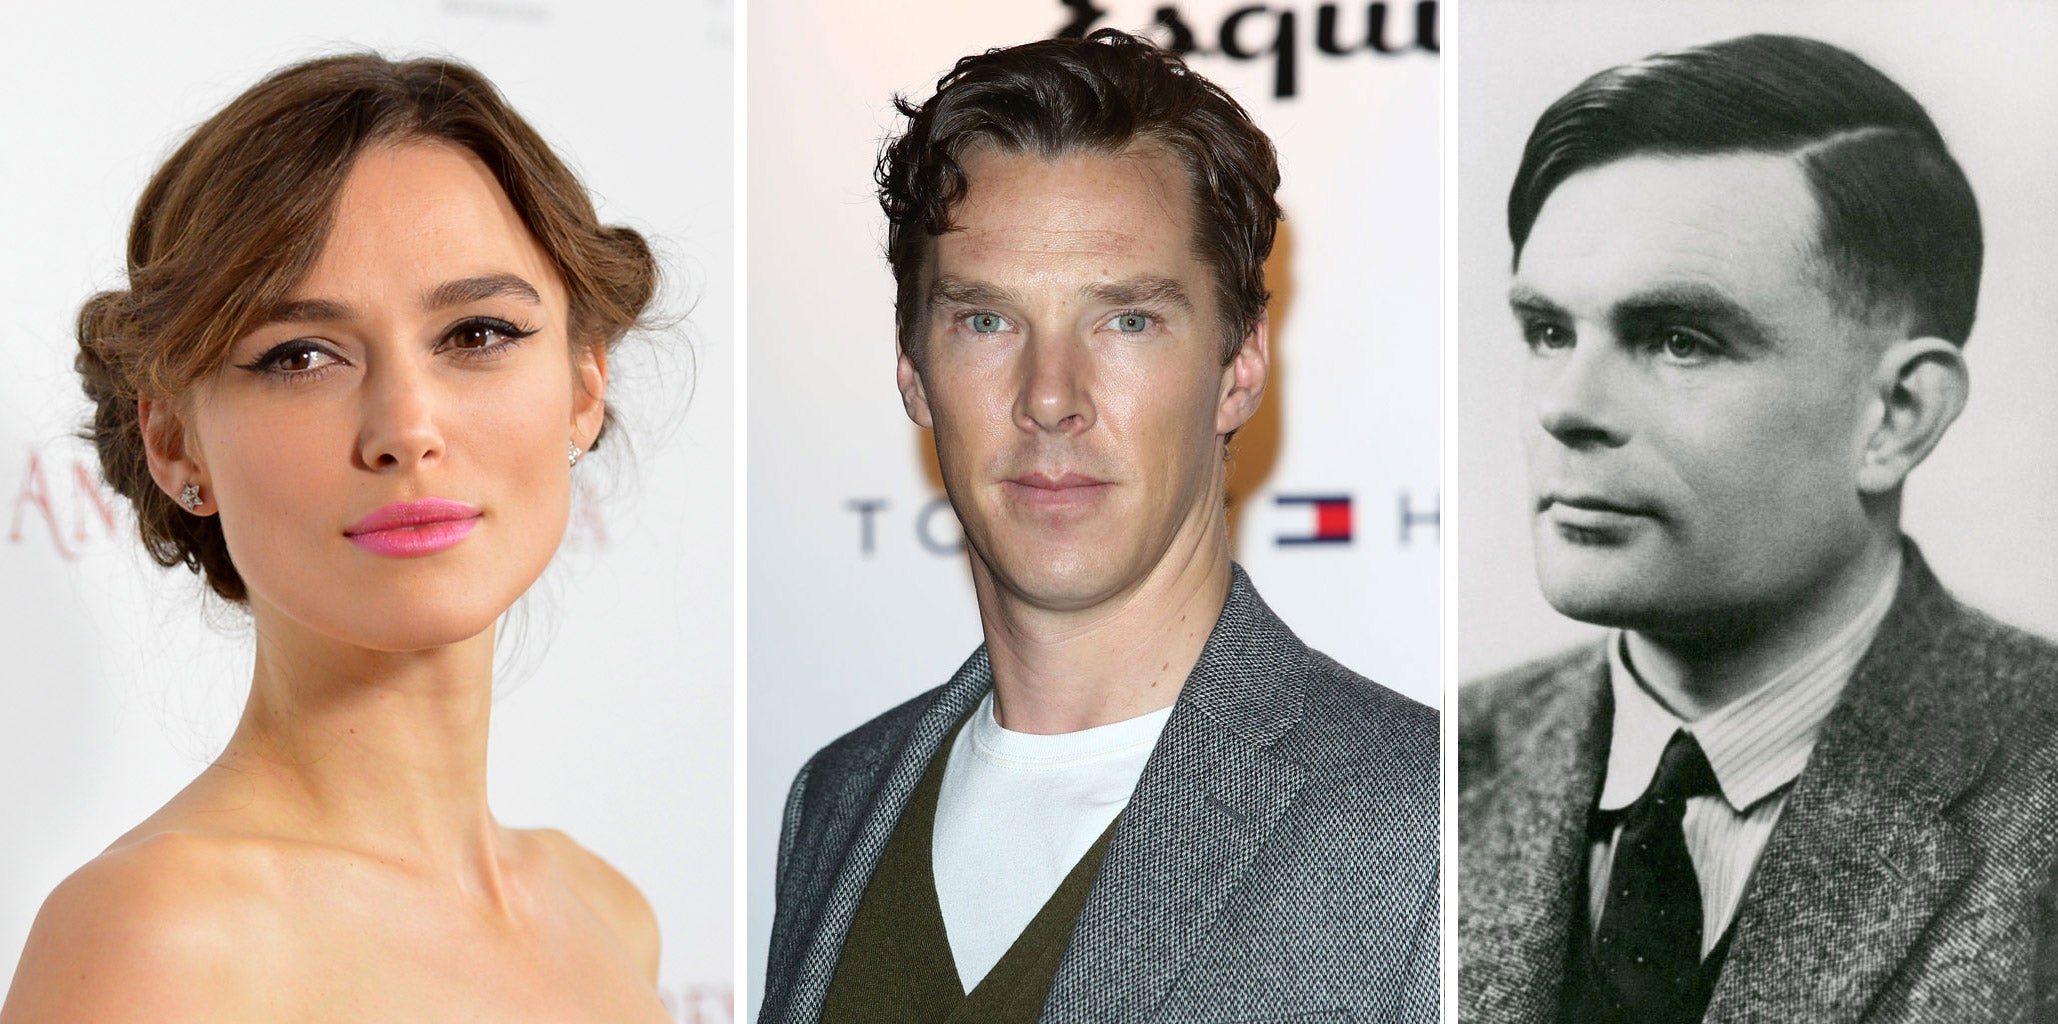 Keira Knightley is in talks to co-star with Benedict Cumberbatch in a biopic about Alan Turing